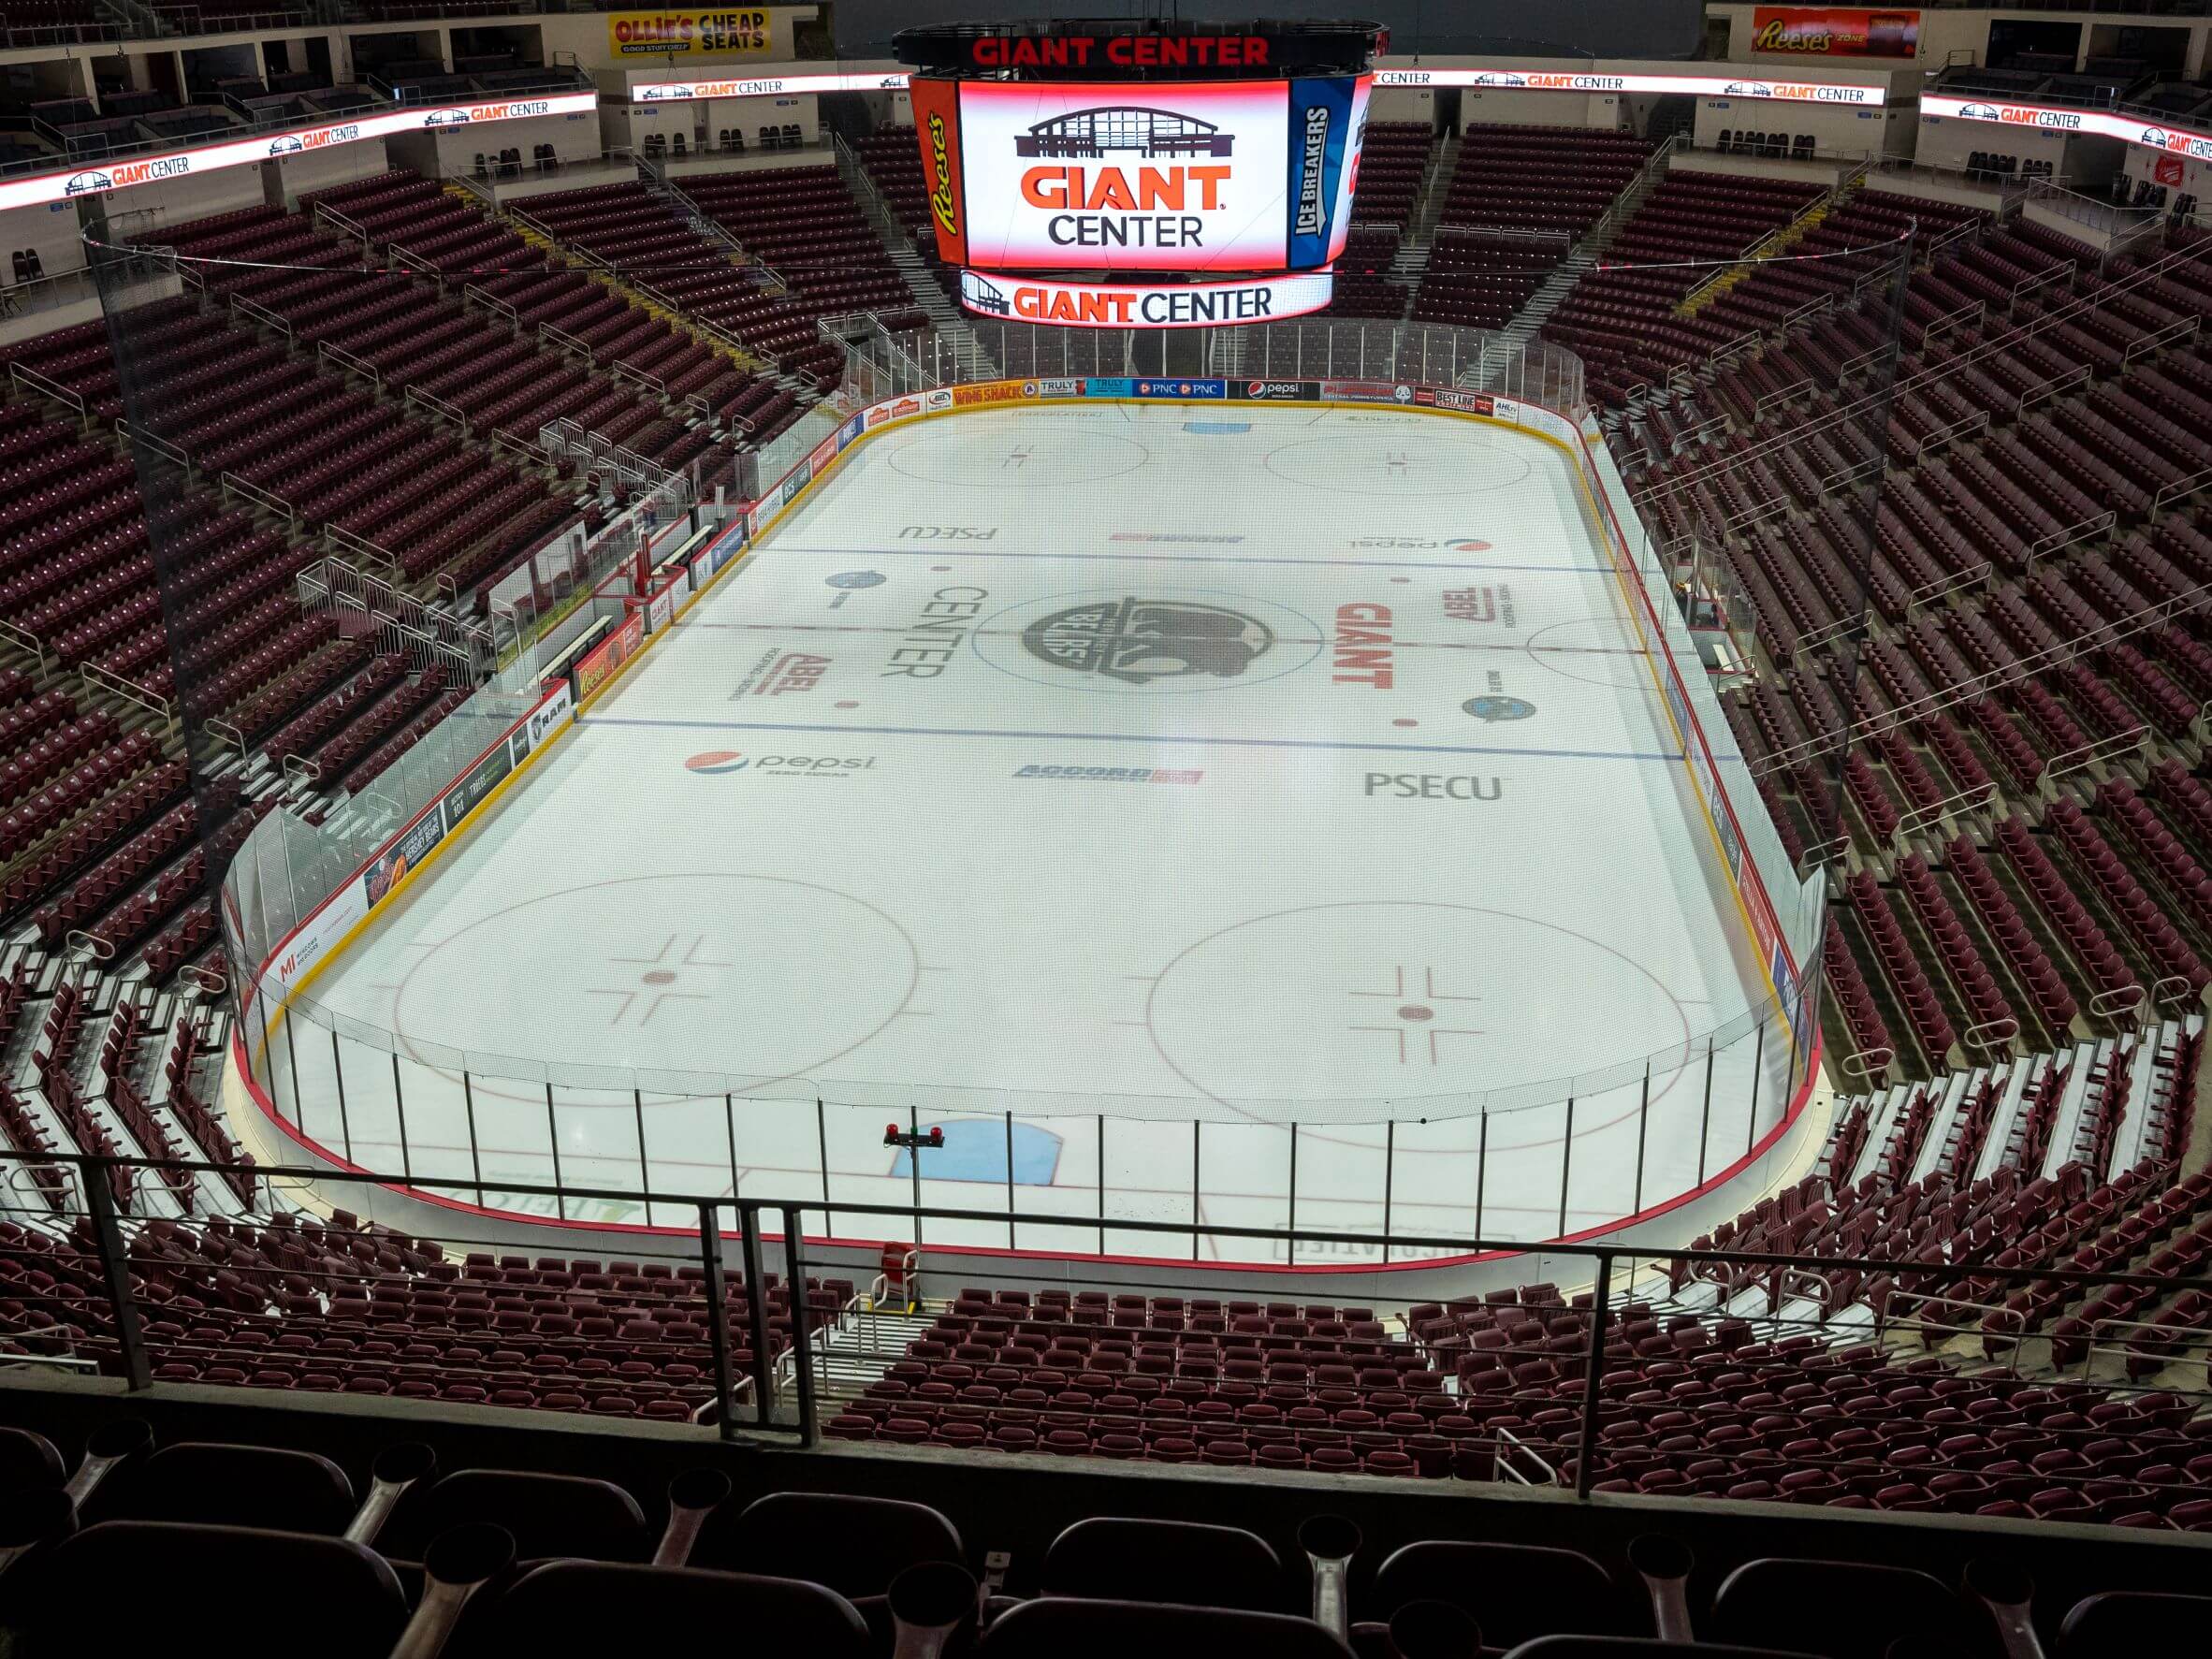 Giant Center Seating Chart Hershey Bears Two Birds Home